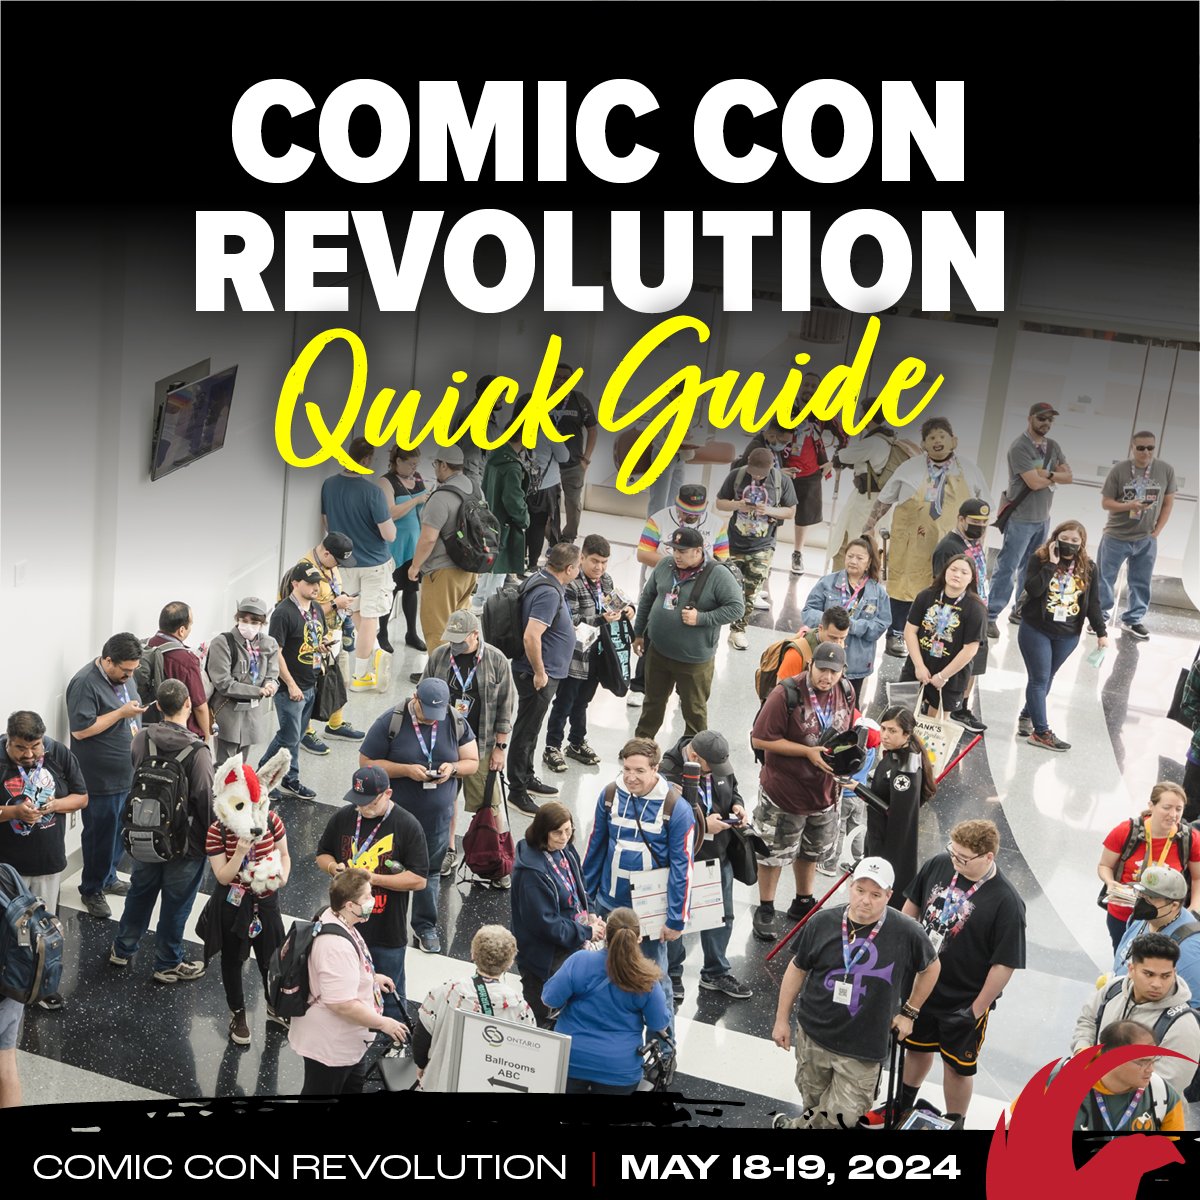 This weekend Comic Con Revolution takes over the Ontario Convention Center. We've put together some key info. Whether it's your first time or the seventh time, check this helpful guide to plan your CCR: -Parking -Registration -Where To Find... -& More! atomiccrushevents.com/ccr/ontario/_f…